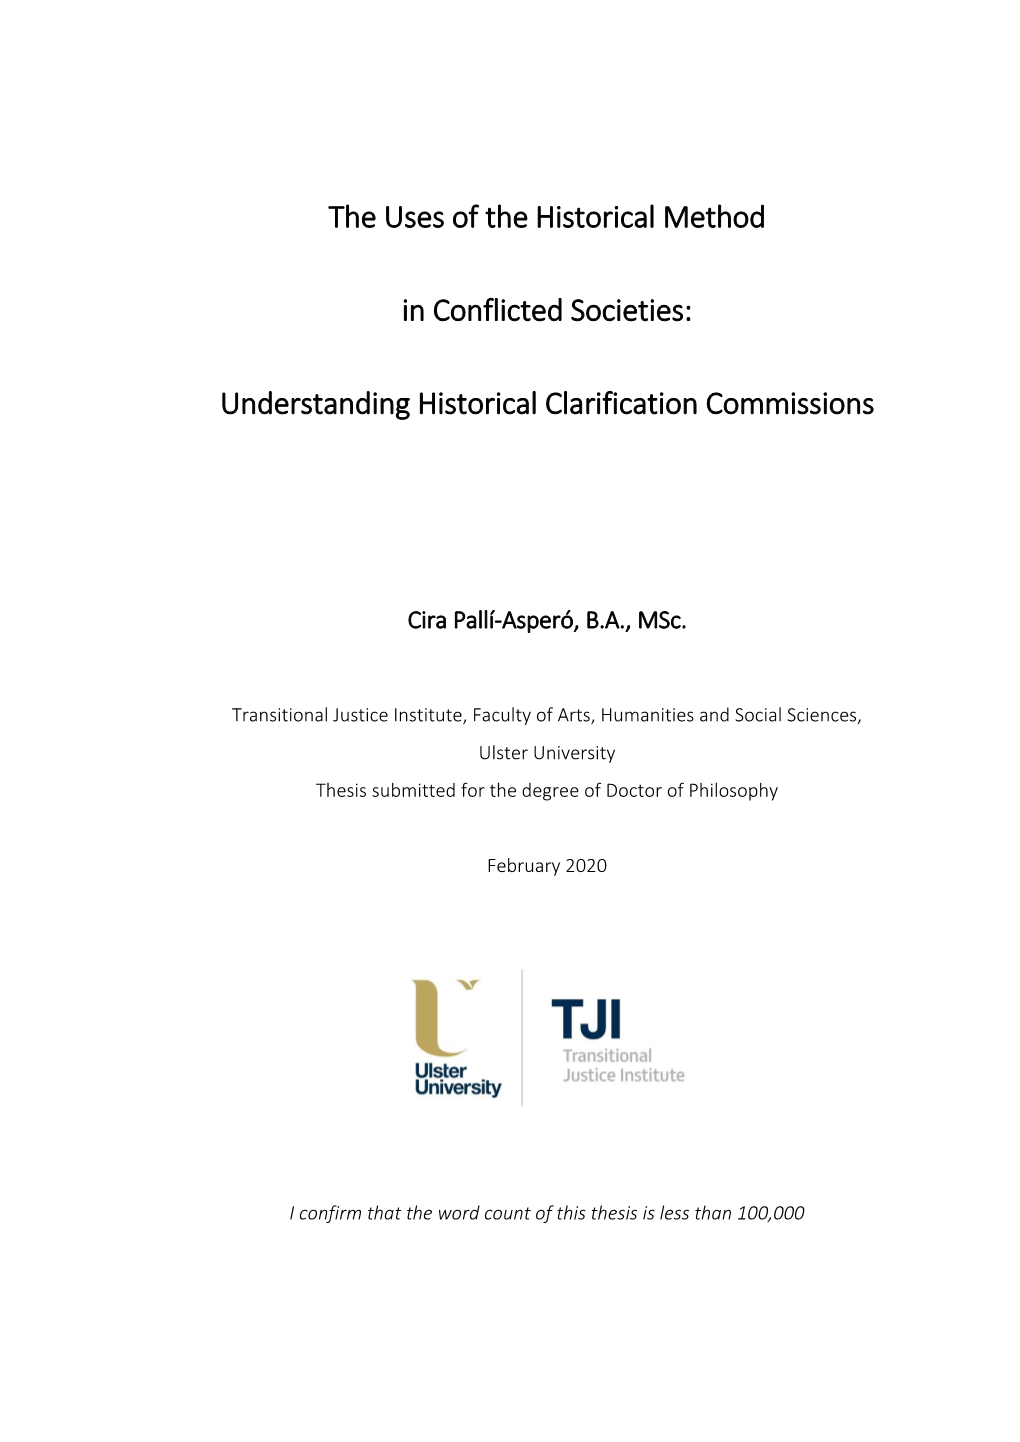 The Uses of the Historical Method in Conflicted Societies Through the Work of Historical Clarification Commissions (HCC) As State-Sponsored Bodies of Inquiry